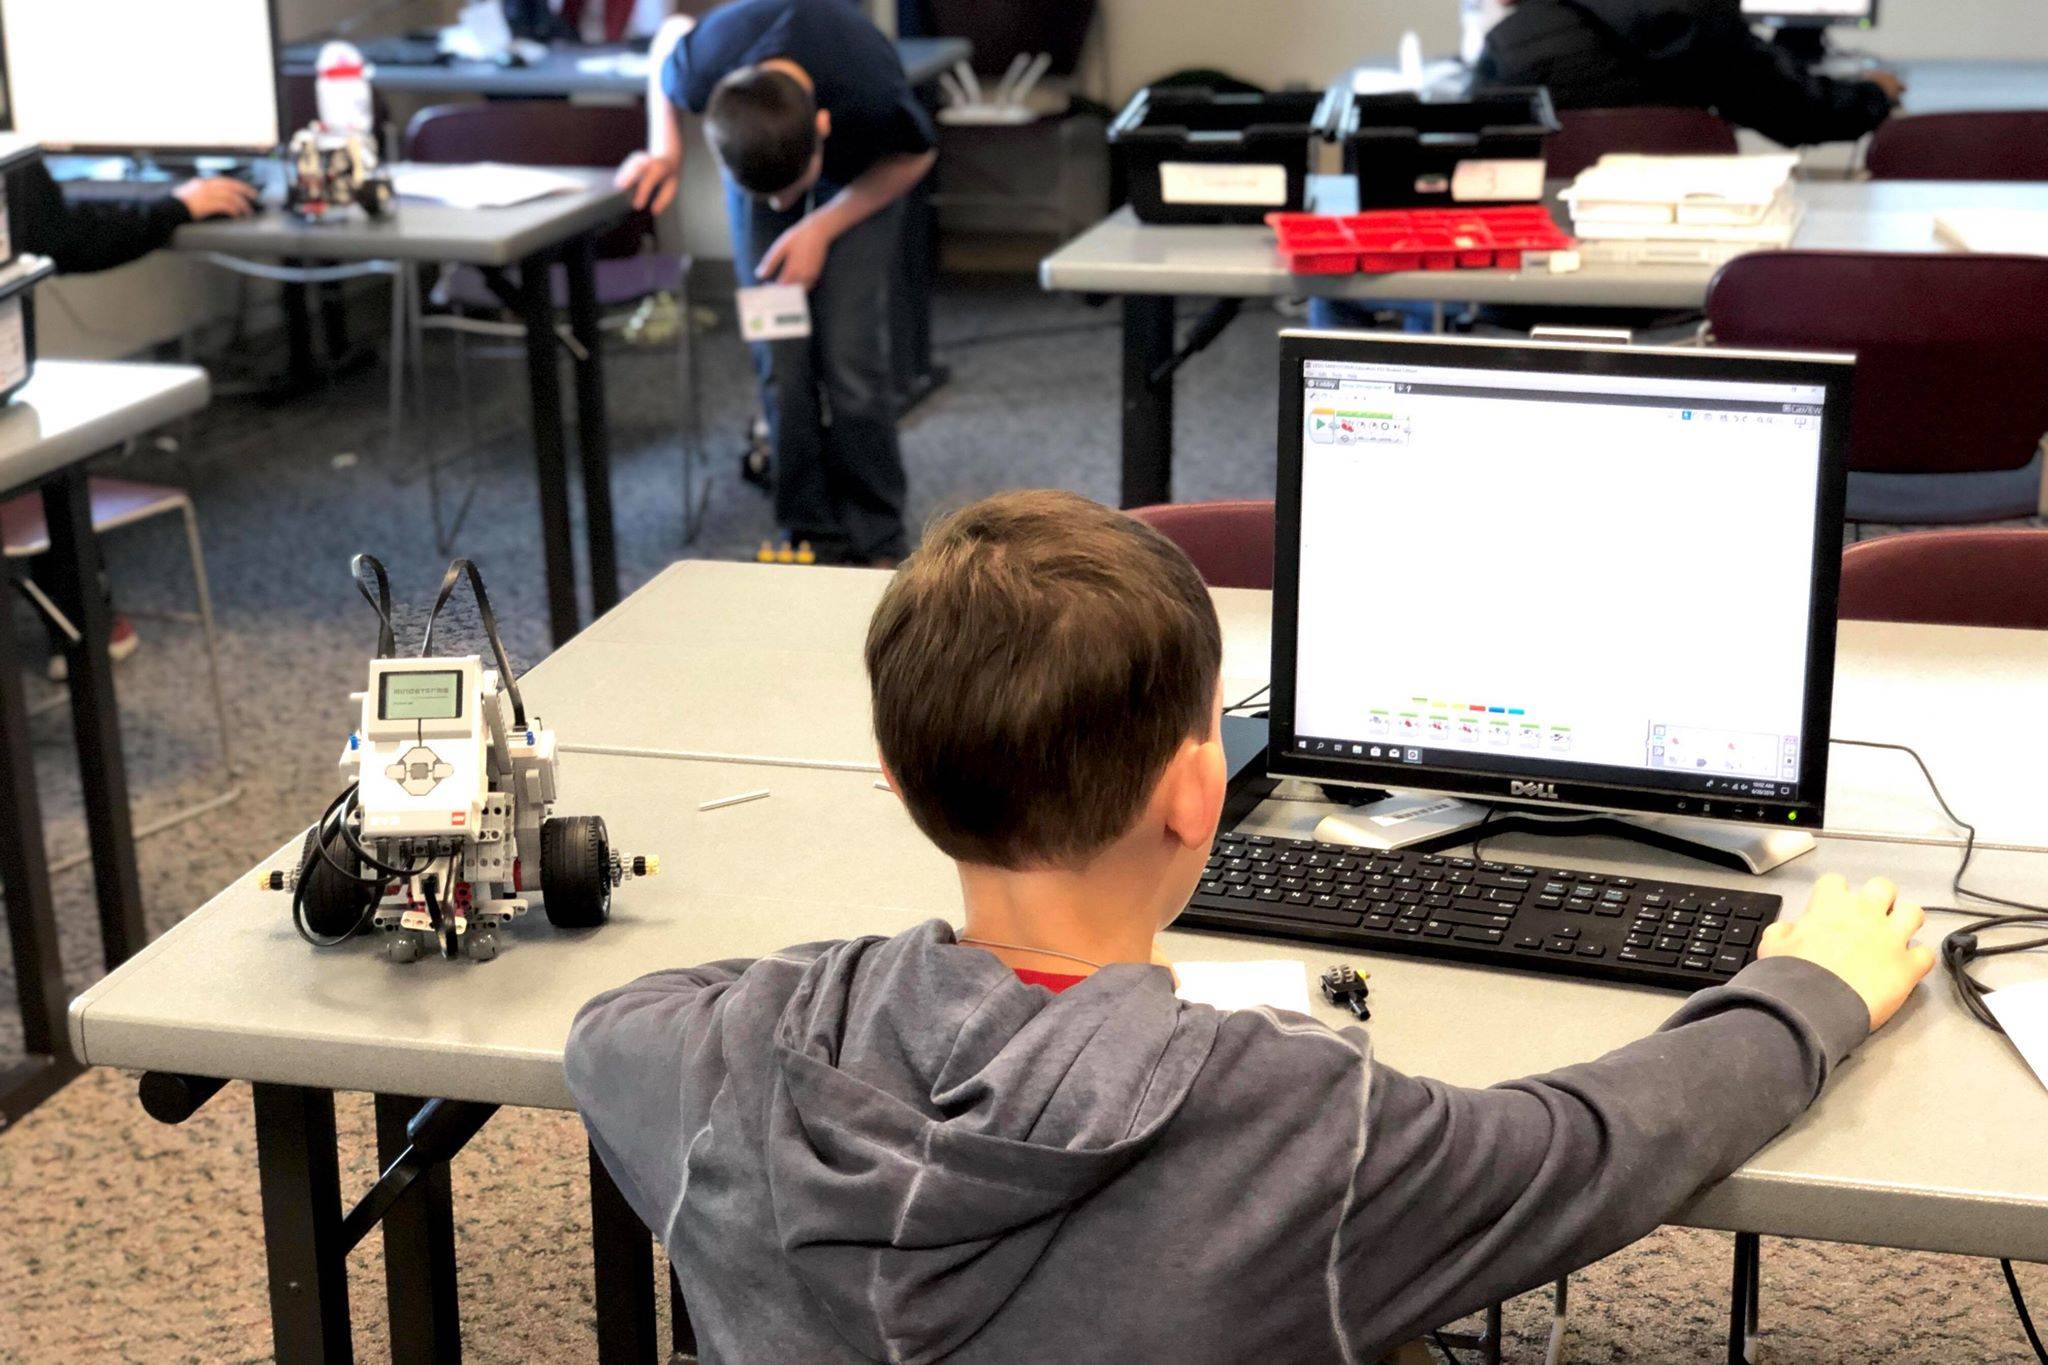 A student works on programming his Lego robot in the Lego robotics UAA College of Engineering Summer Engineering Academies, on Wednesday, June 26, 2019, at the Kenai Peninsula College near Soldotna, Alaska. (Photo by Victoria Petersen/Peninsula Clarion)